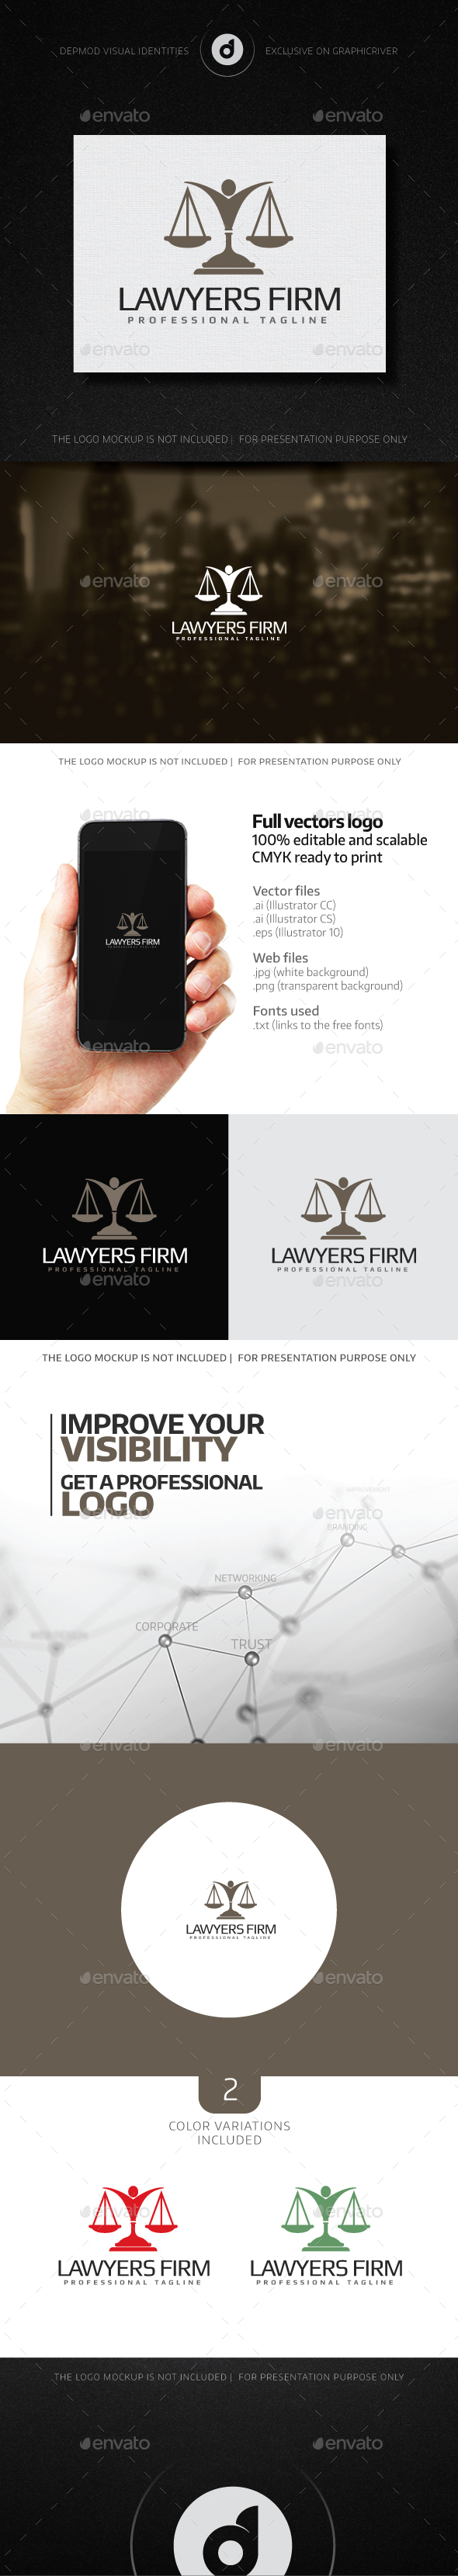 Lawyers Firm